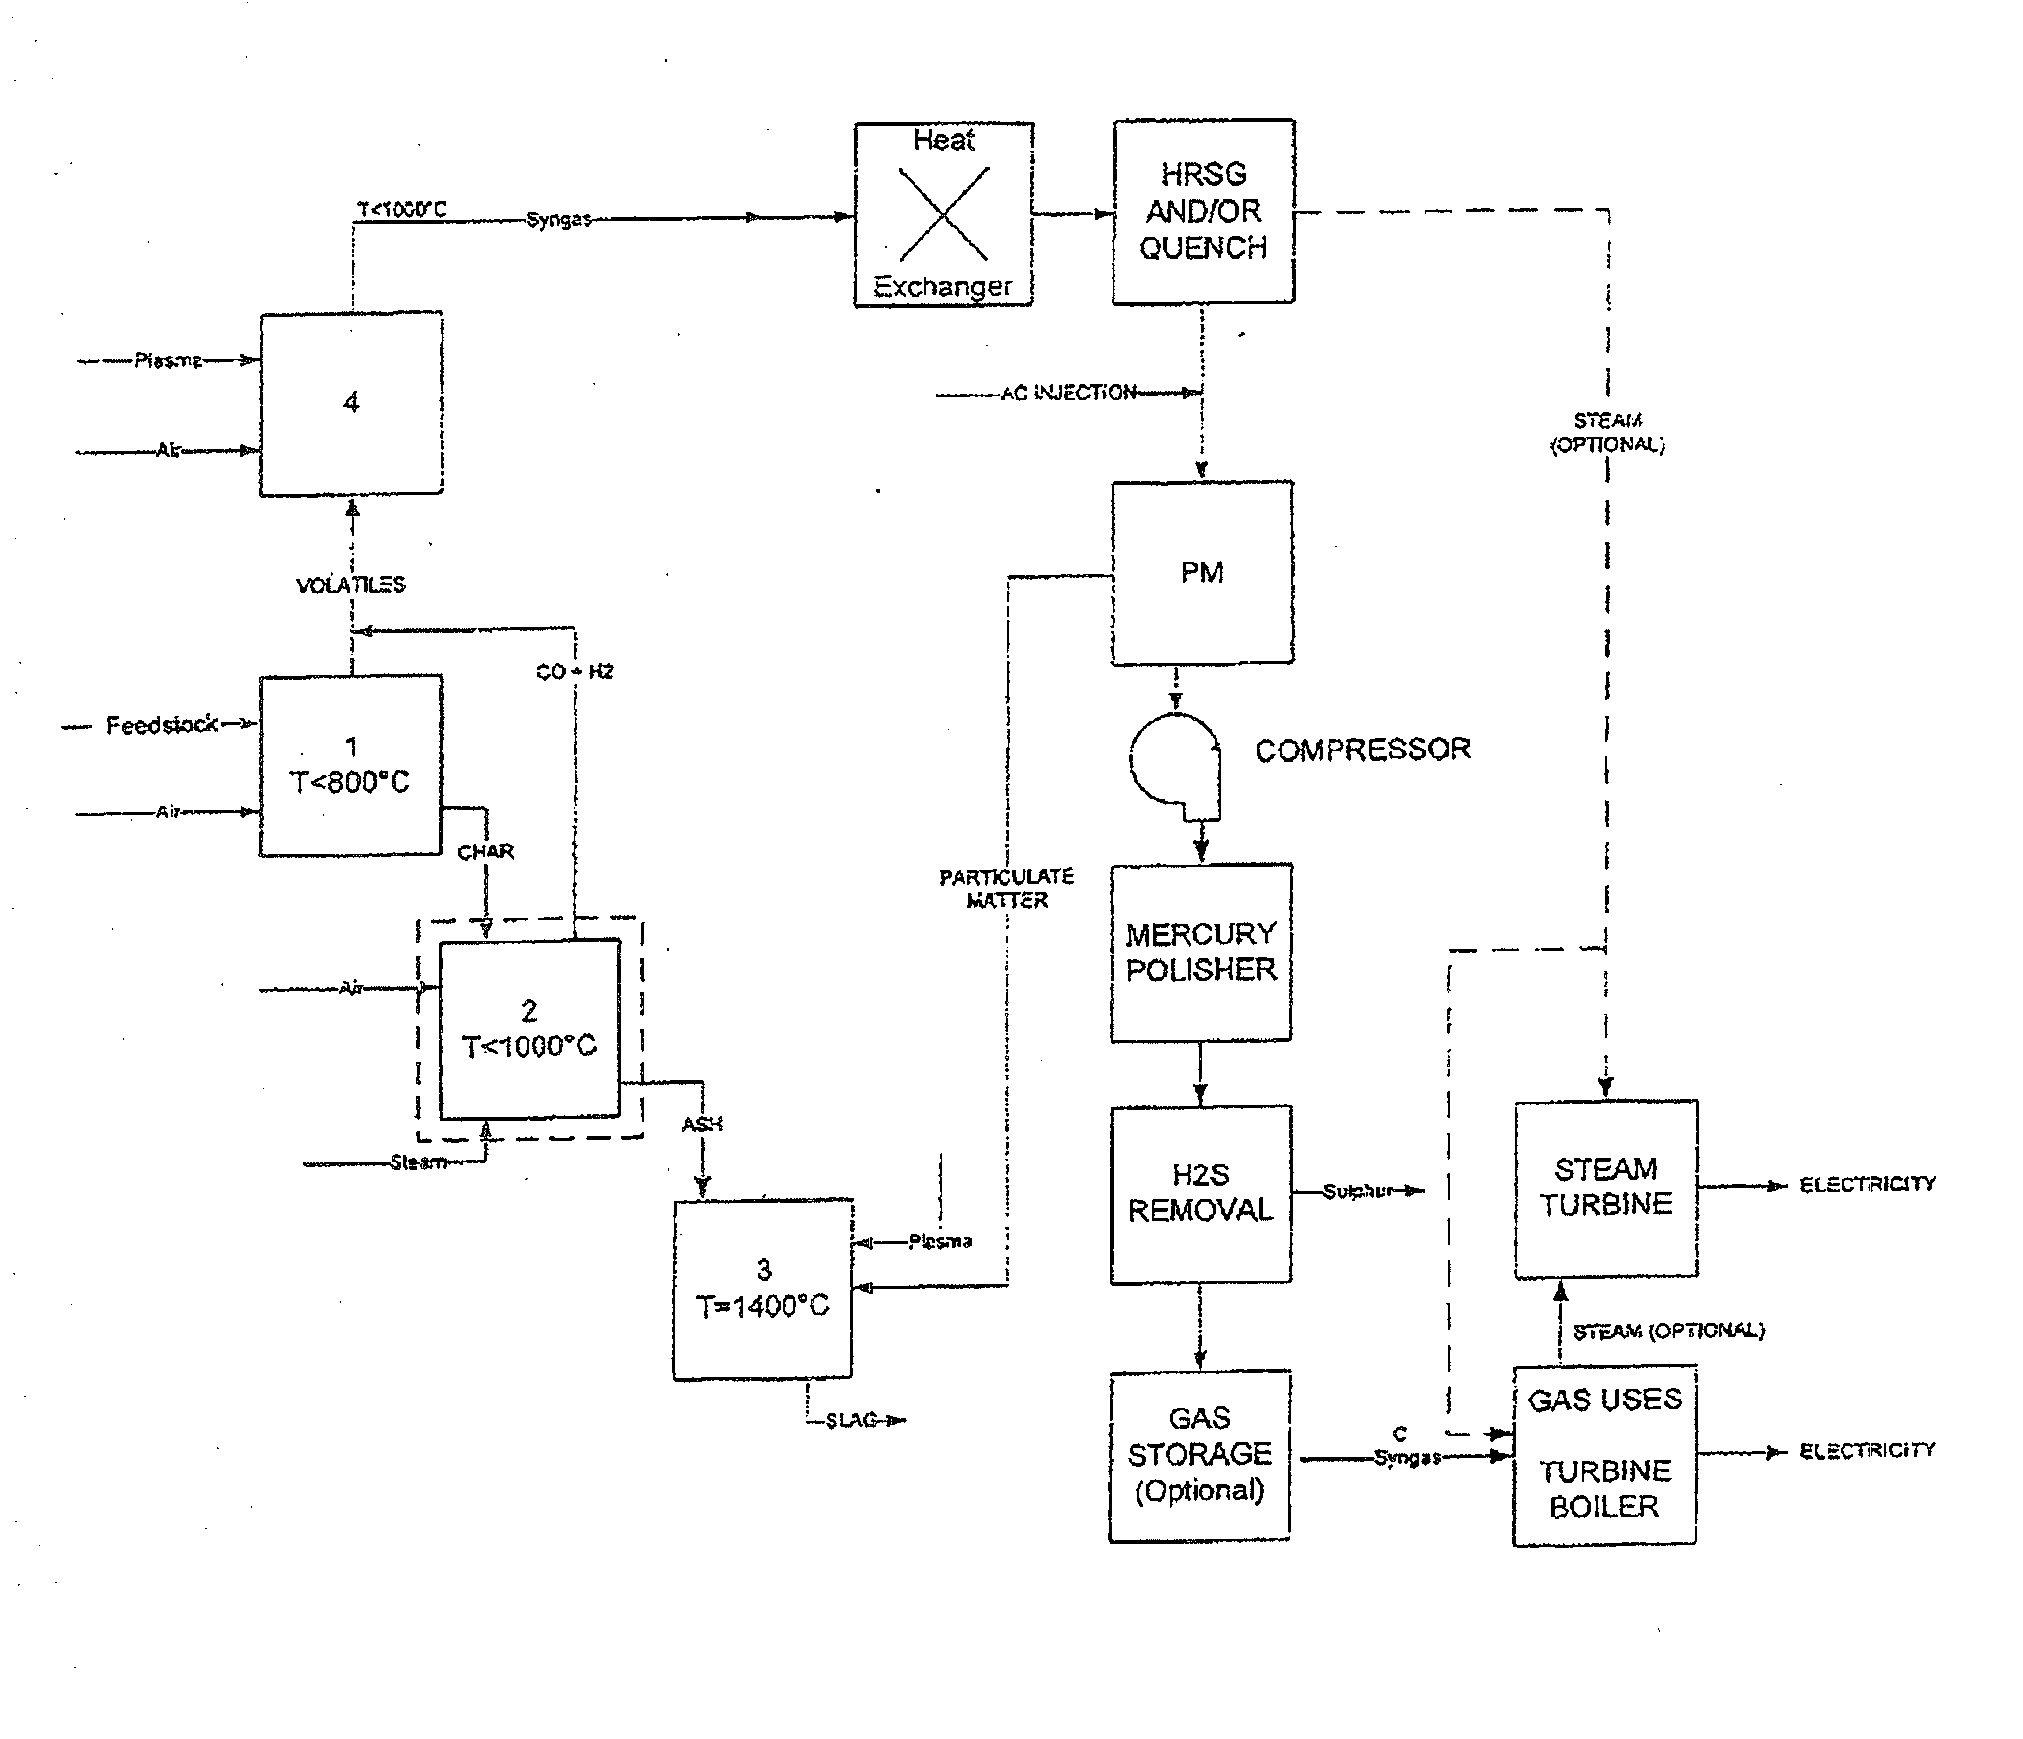 Gasification system with processed feedstock/char conversion and gas reformulation